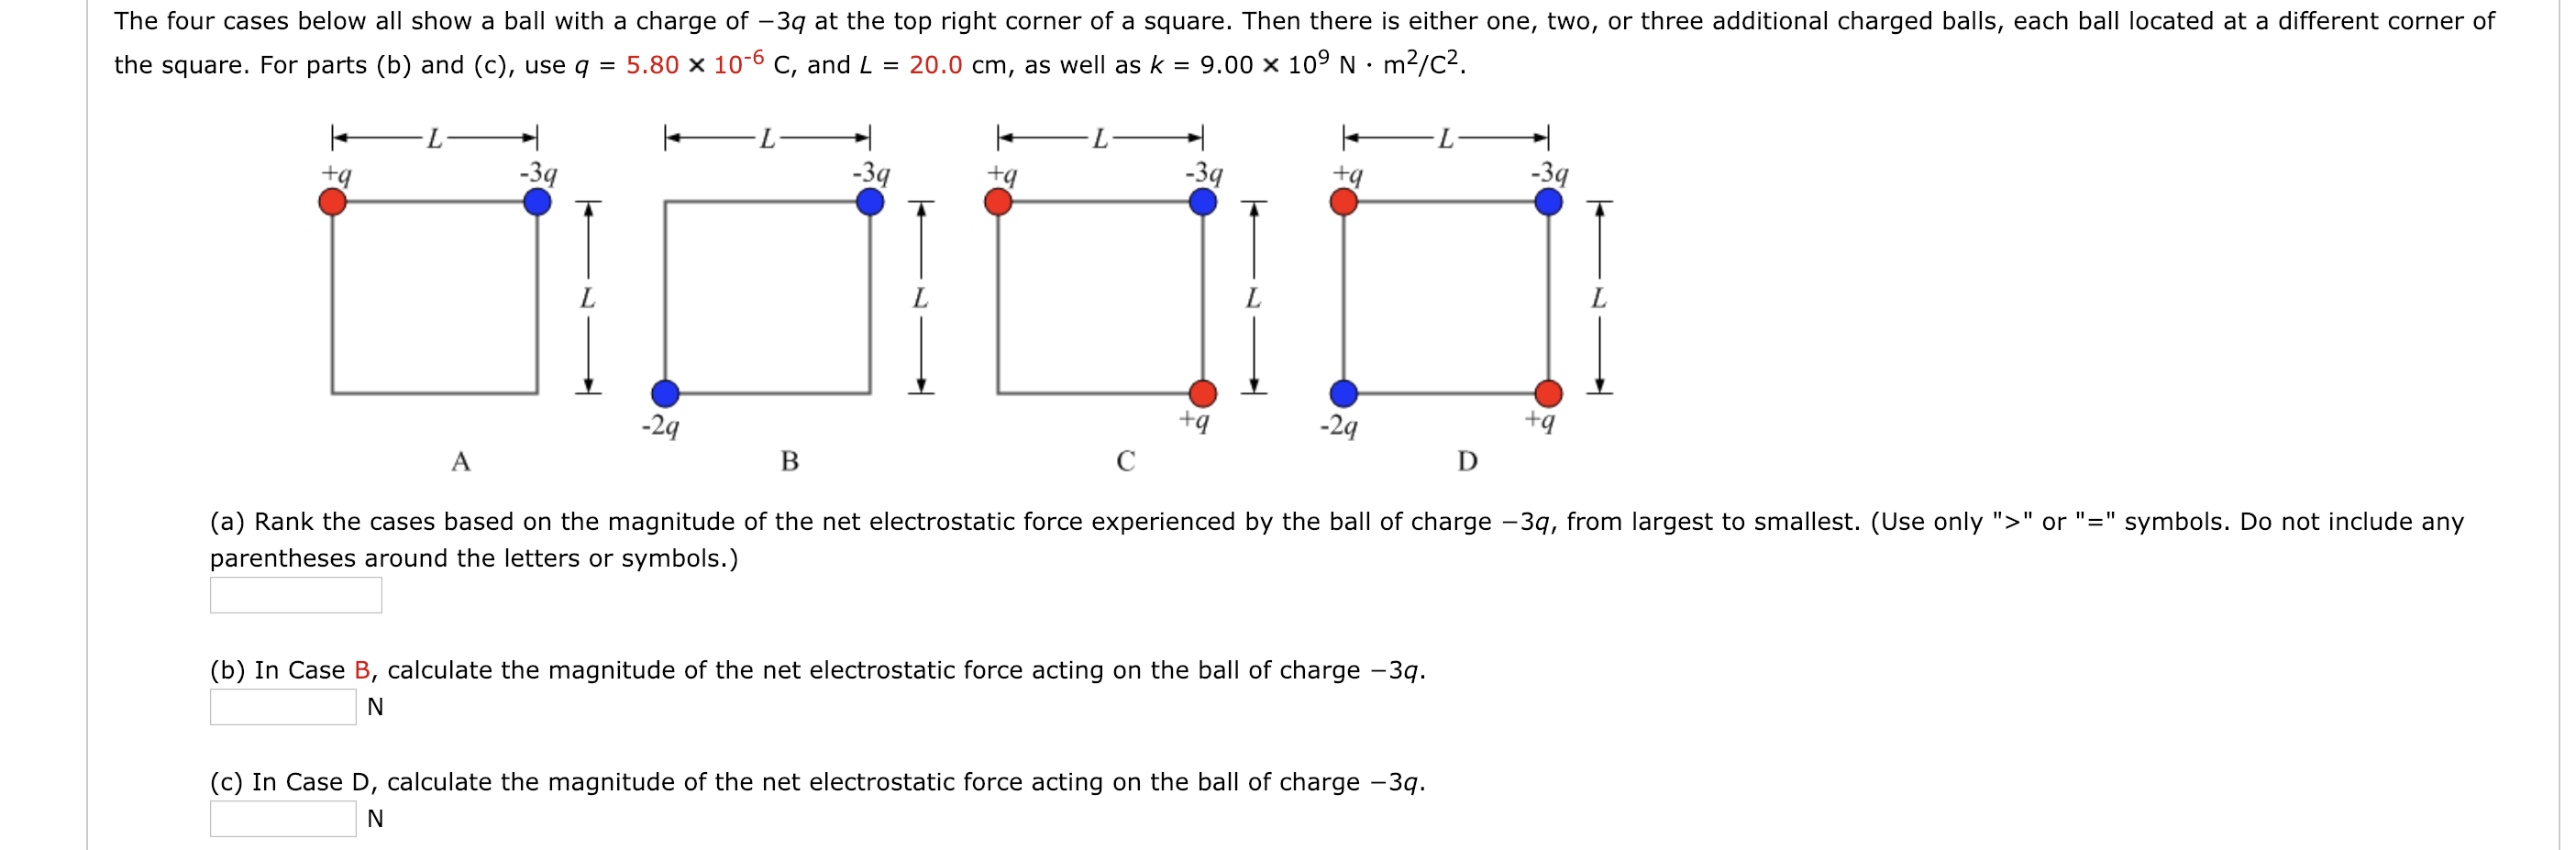 The four cases below all show a ball with a charge of -3q at the top right corner of a square. Then there is either one, two, or three additional charged balls, each ball located at a different corner of
the square. For parts (b) and (c), use q 5.80 x 10-6 C, and L 20.0 cm, as well as k9.00 x 109 N m2/c2
2q
-2q
tq
(a) Rank the cases based on the magnitude of the net electrostatic force experienced by the ball of charge -3q, from largest to smallest. (Use only "orsymbols. Do not include any
parentheses around the letters or symbols.)
(b) In Case B, calculate the magnitude of the net electrostatic force acting on the ball of charge -3q
Iae D, calculate the magnitude of the net electrostatic force acting on the ball of charge -3
